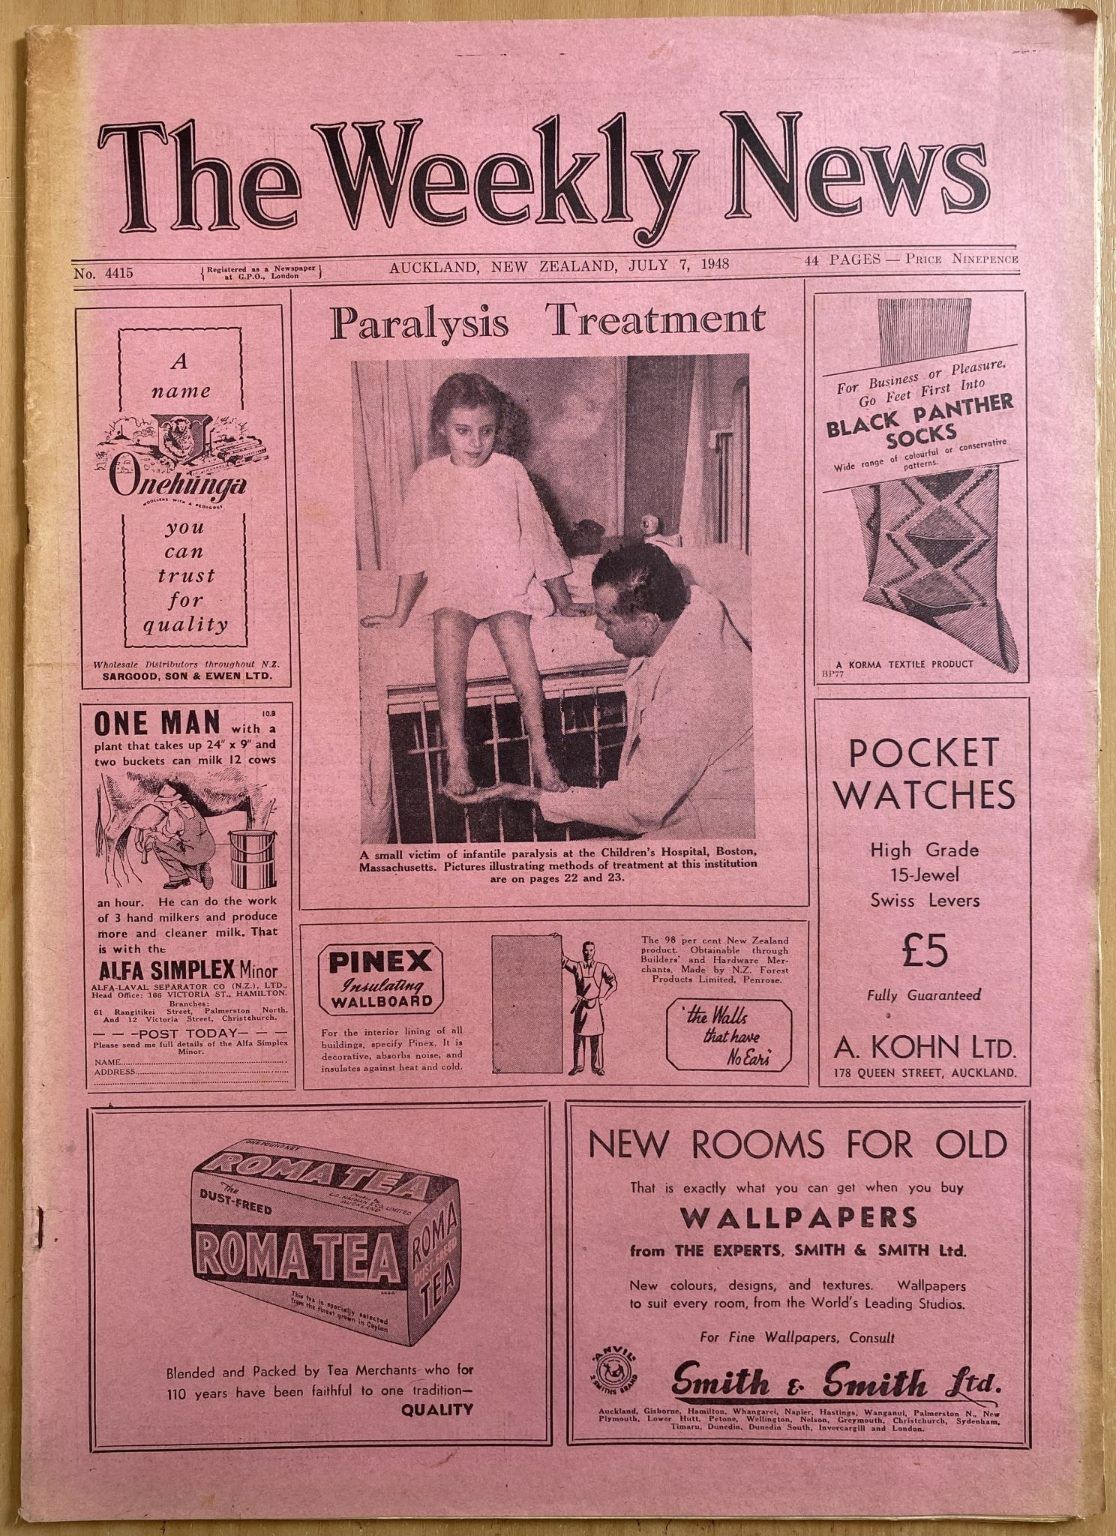 OLD NEWSPAPER: The Weekly News - No. 4415, 7 July 1948